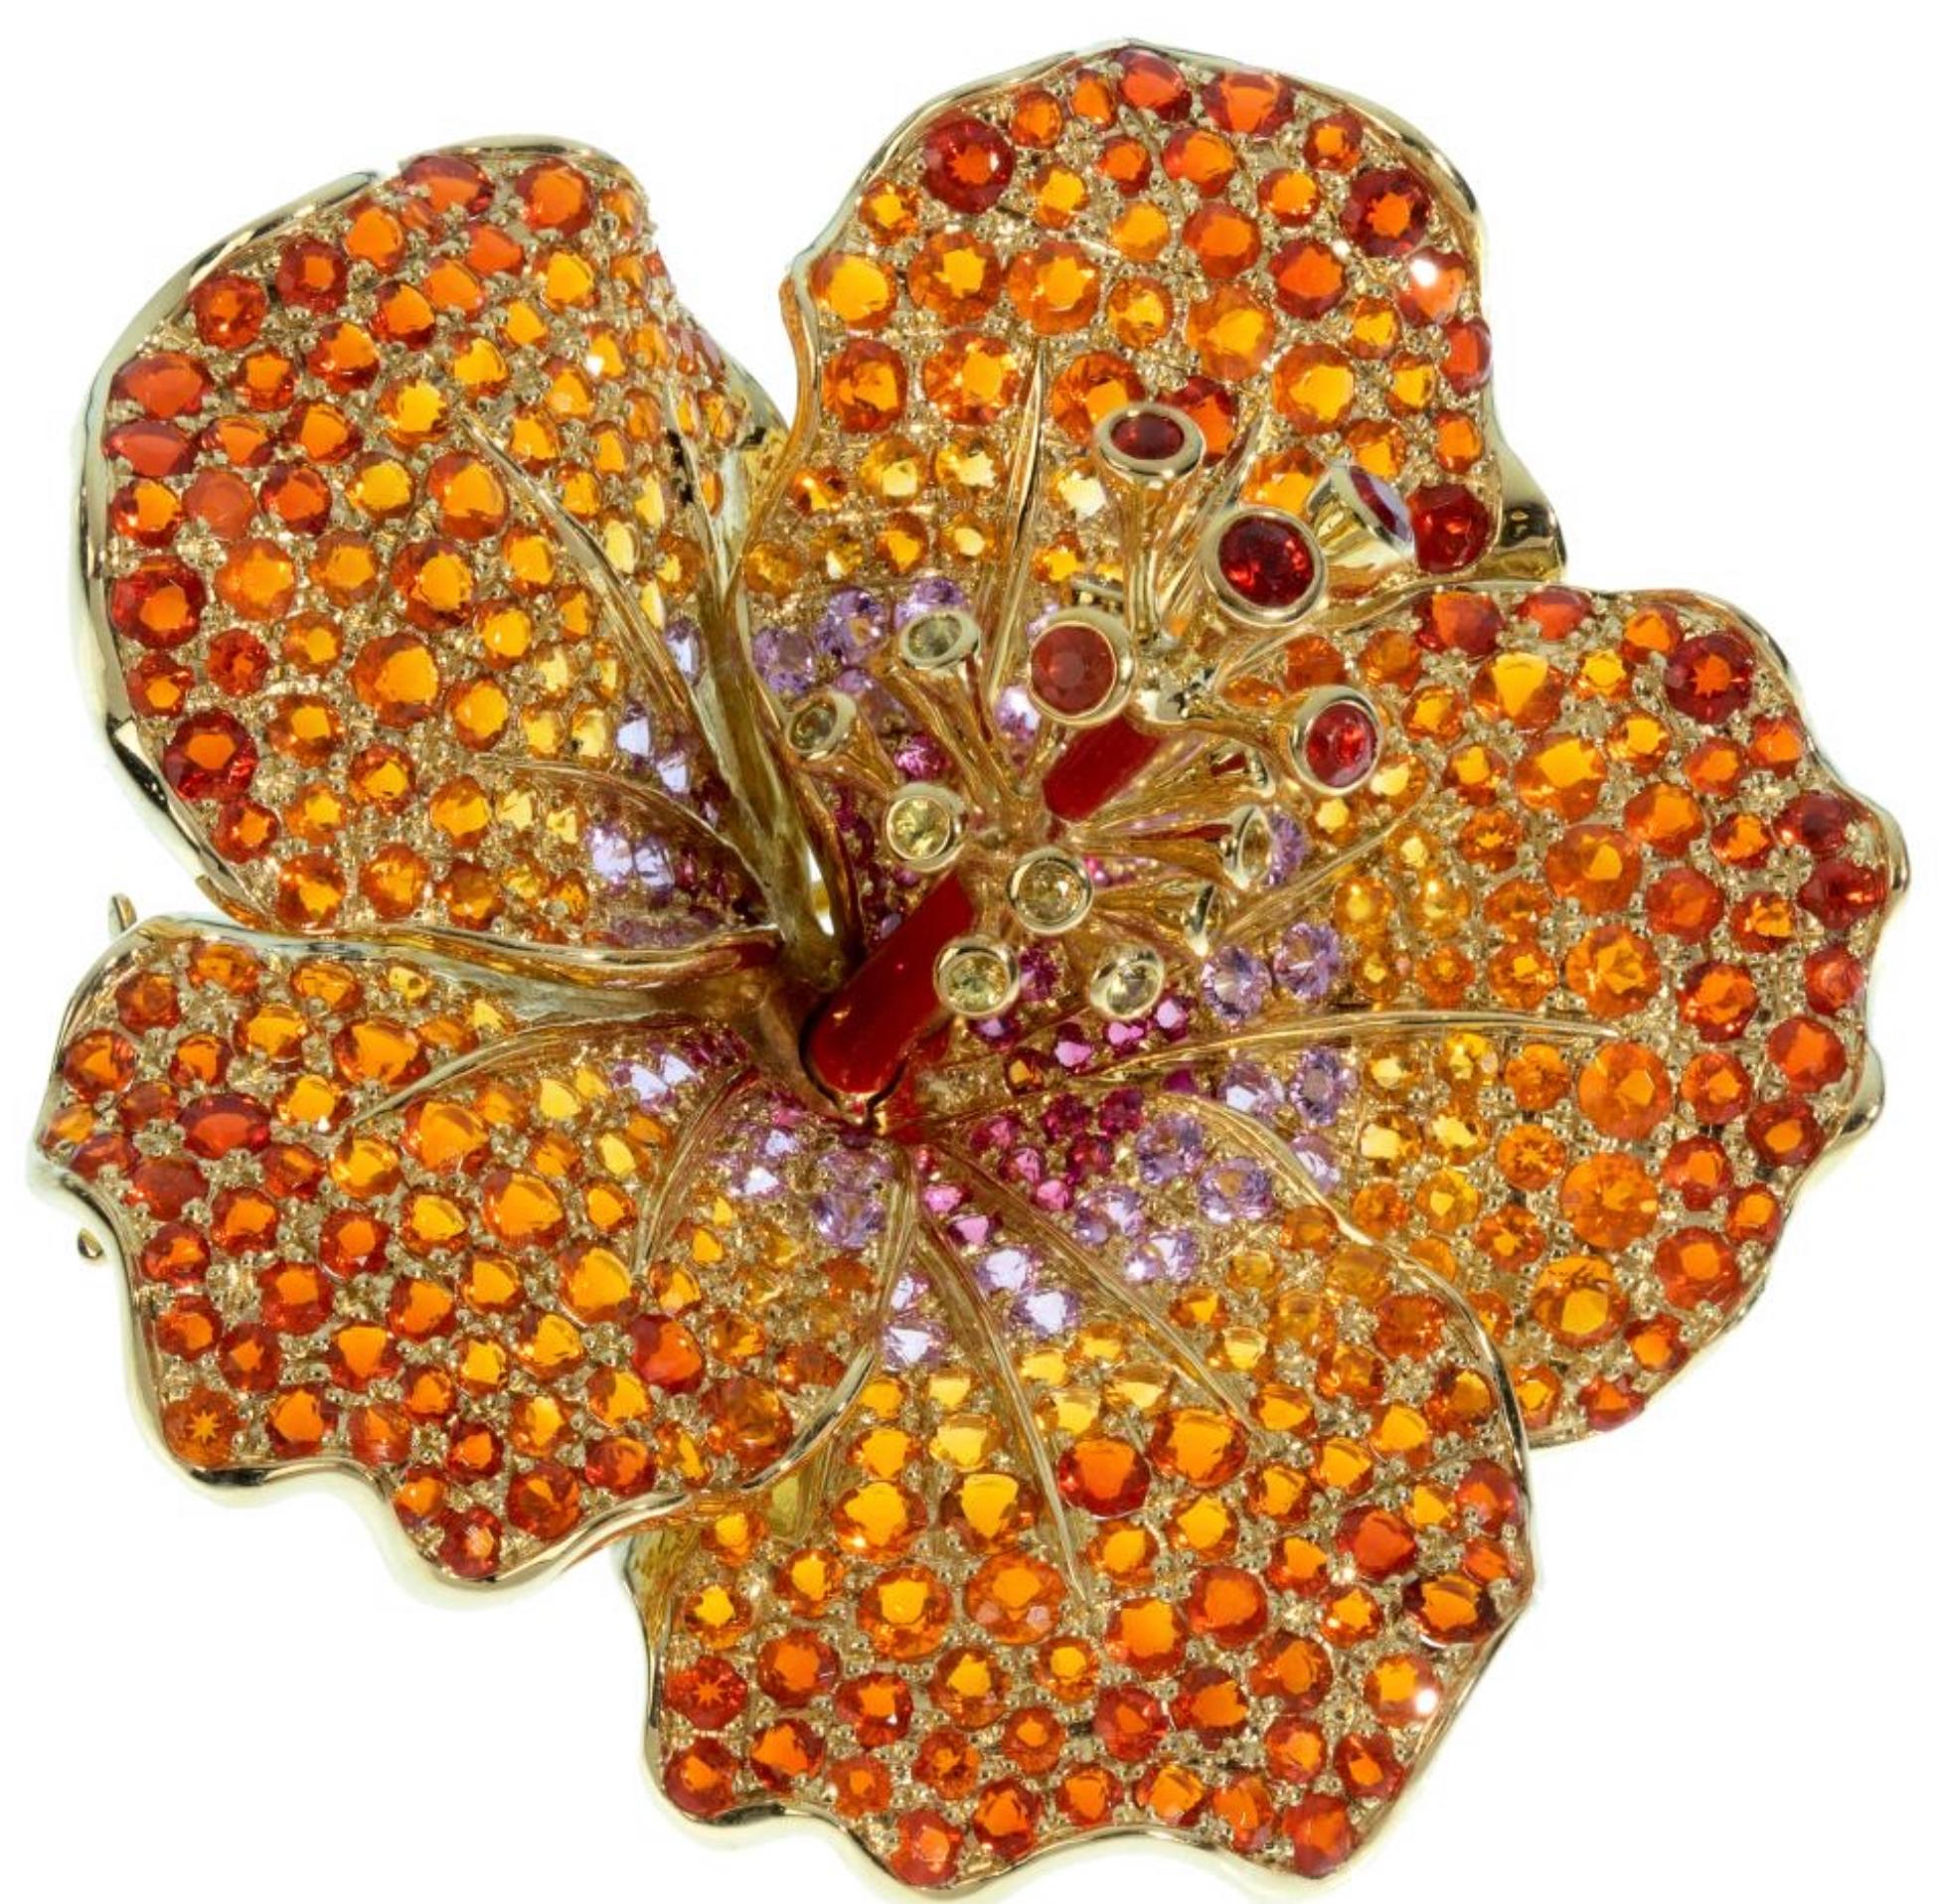 Absolutely stunning one of a kind Paula Crevoshay brooch pin 18k and gemstone flower titled “Nectar of the Sun” from her Masterwork Botanicals collections. Opal =7.77ct., Sapphire(39)=1.81ct, Sapphire(49)=0.88ct., Sapphire(12)=0.25ct. Information